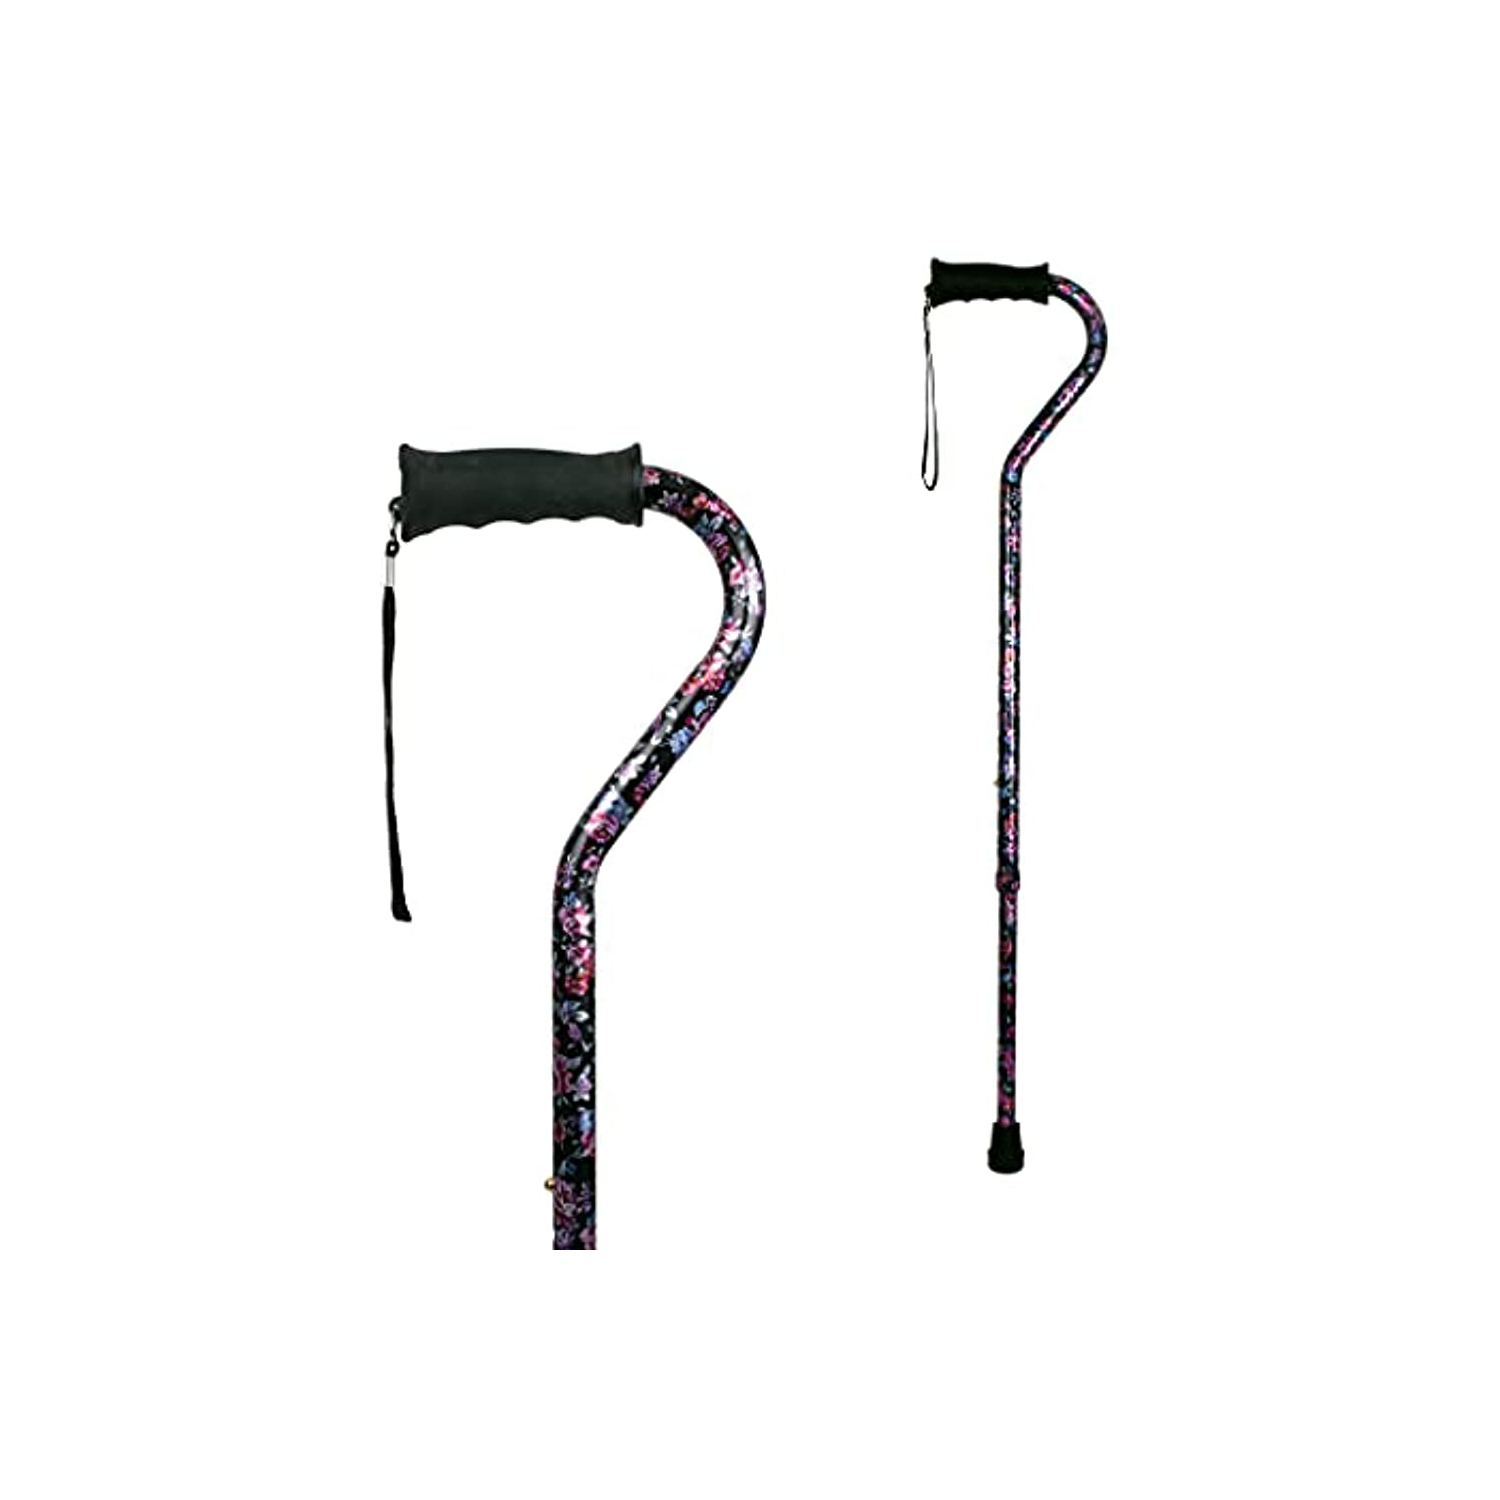 CAREX Ergo Offset Adjustable Cane with Soft Cushioned Handle Women - Black  with Floral Pattern